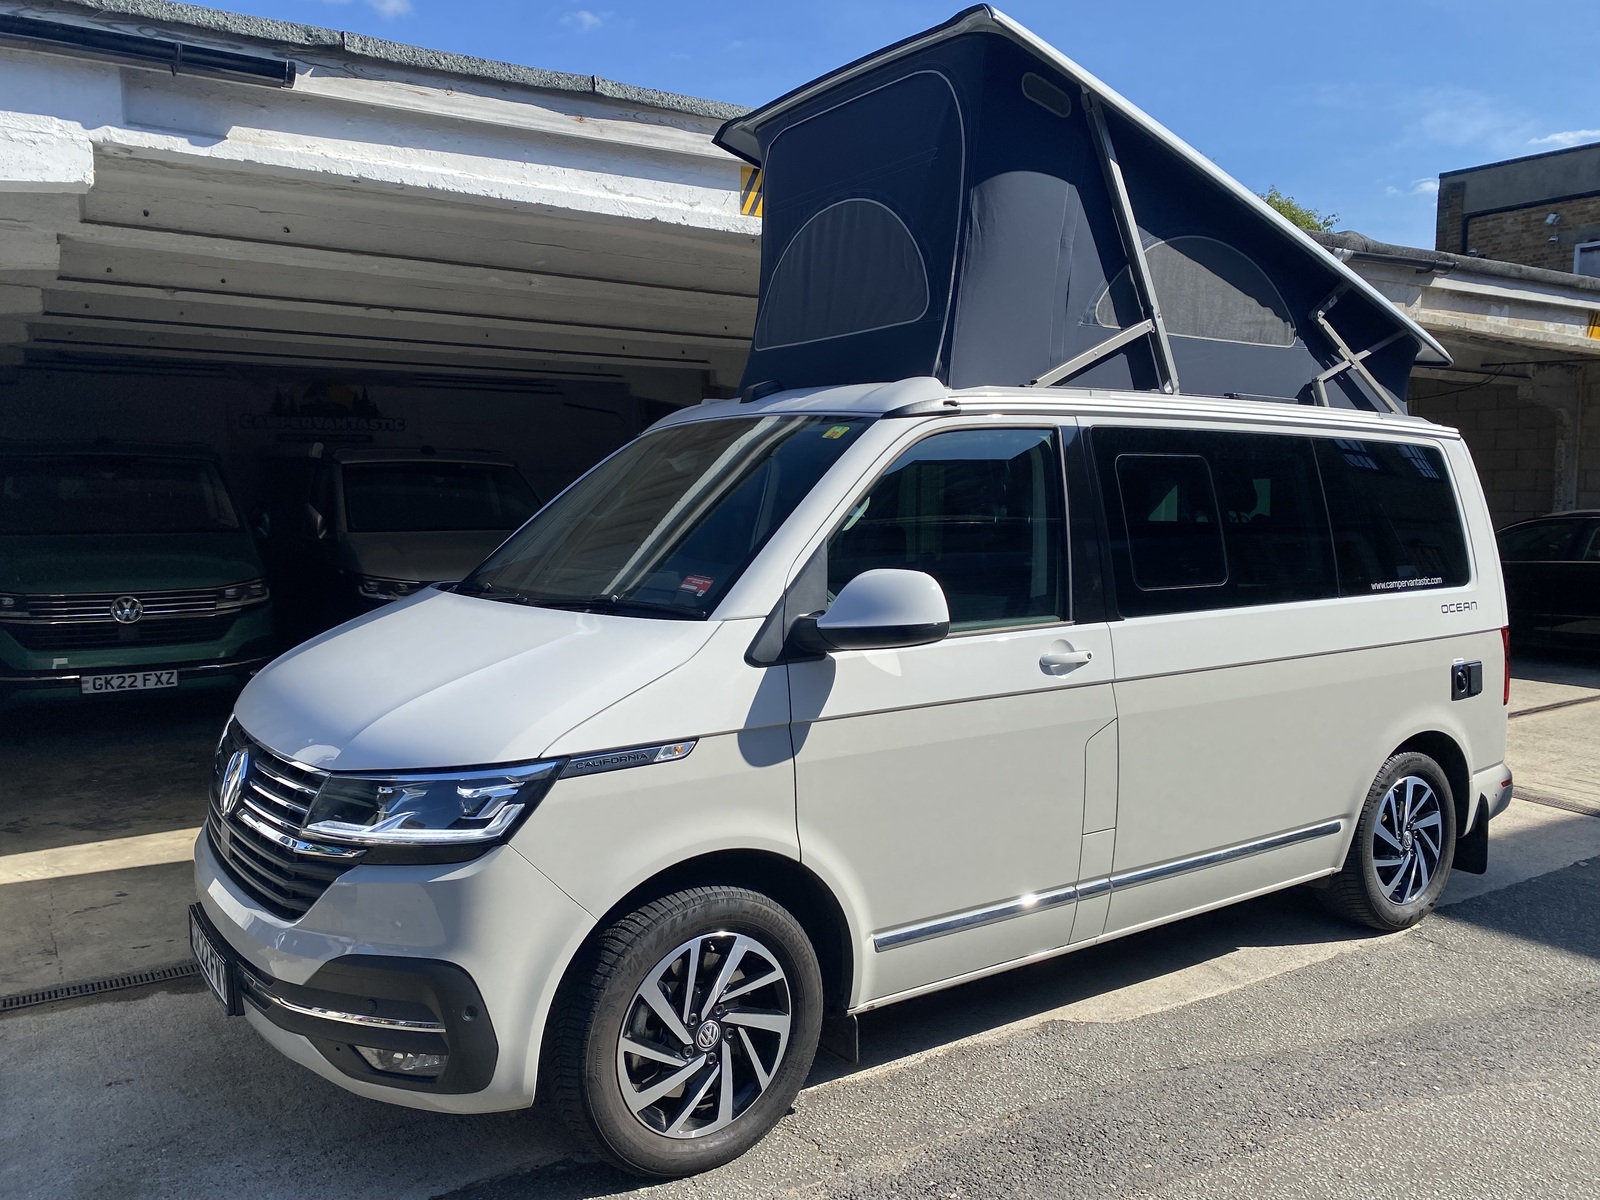 VW California Ocean Camper Van T6.1 2022 4-Motion Ascot Grey and Candy  White 2.0lt BiTDi 204 PS 7 Speed DSG Automatic